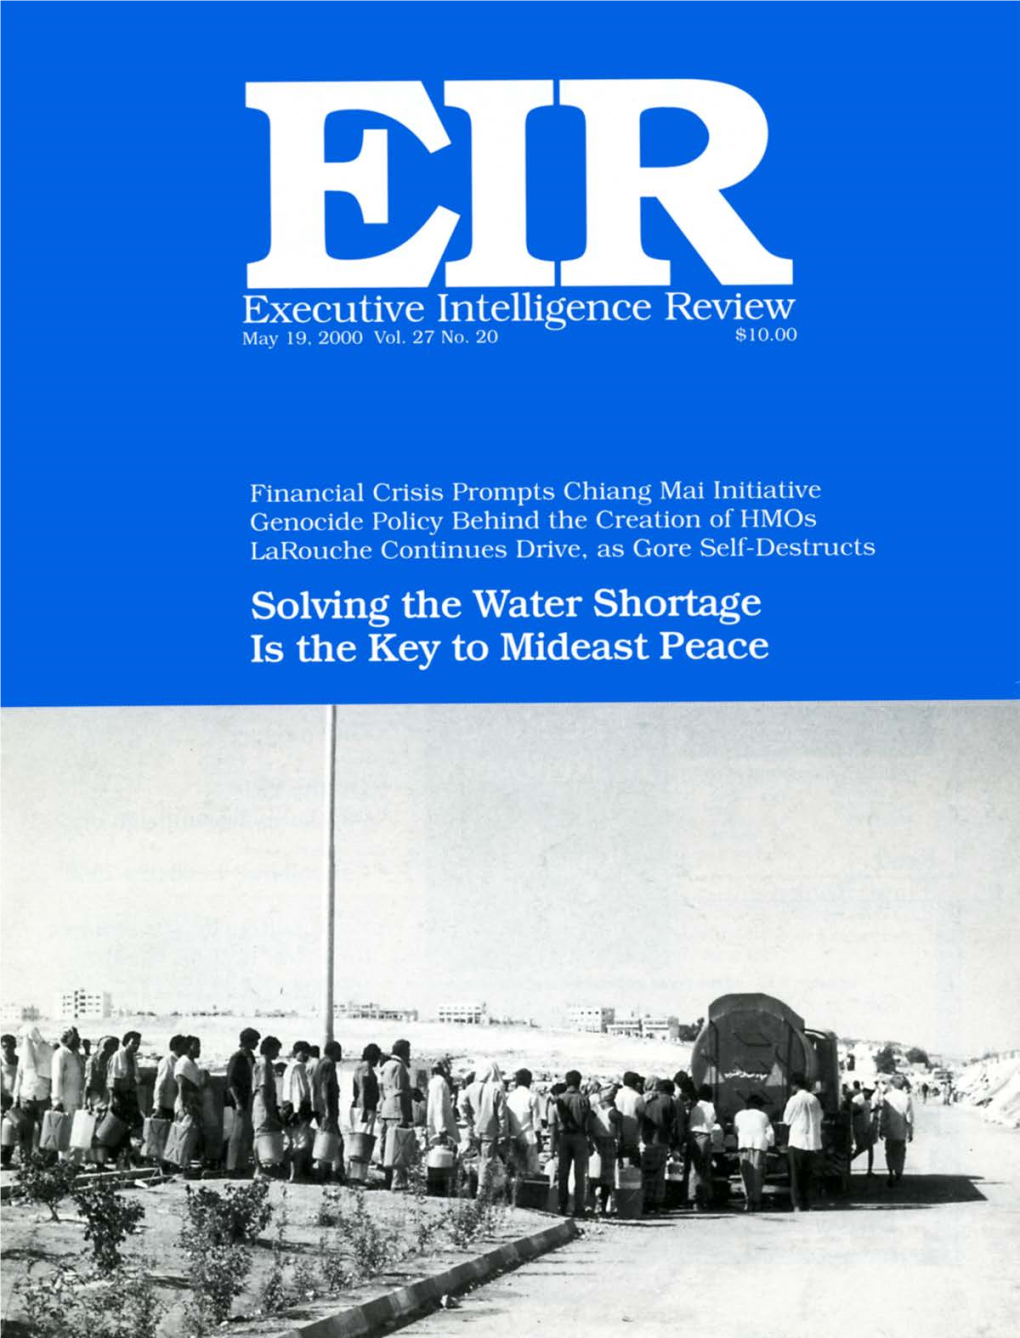 Executive Intelligence Review, Volume 27, Number 20, May 19, 2000